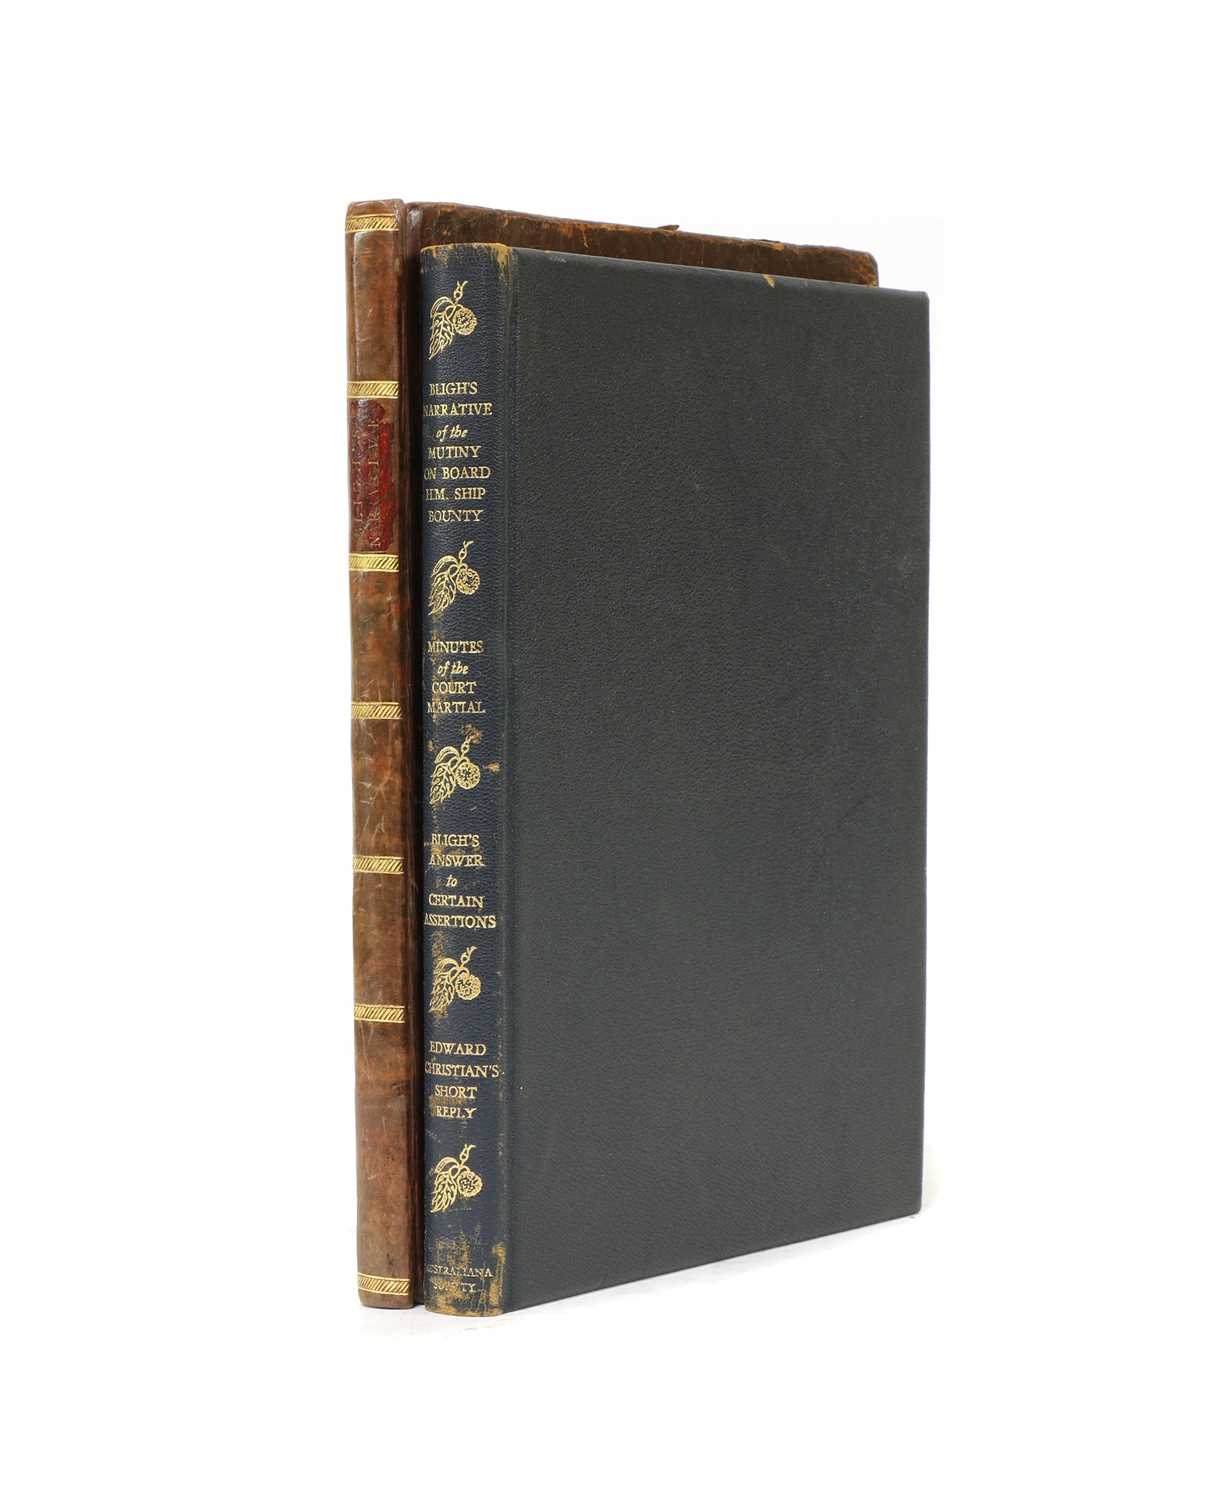 Lot 109 - BLIGH, William: A Narrative of the Mutiny on board His Majesty's Ship Bounty